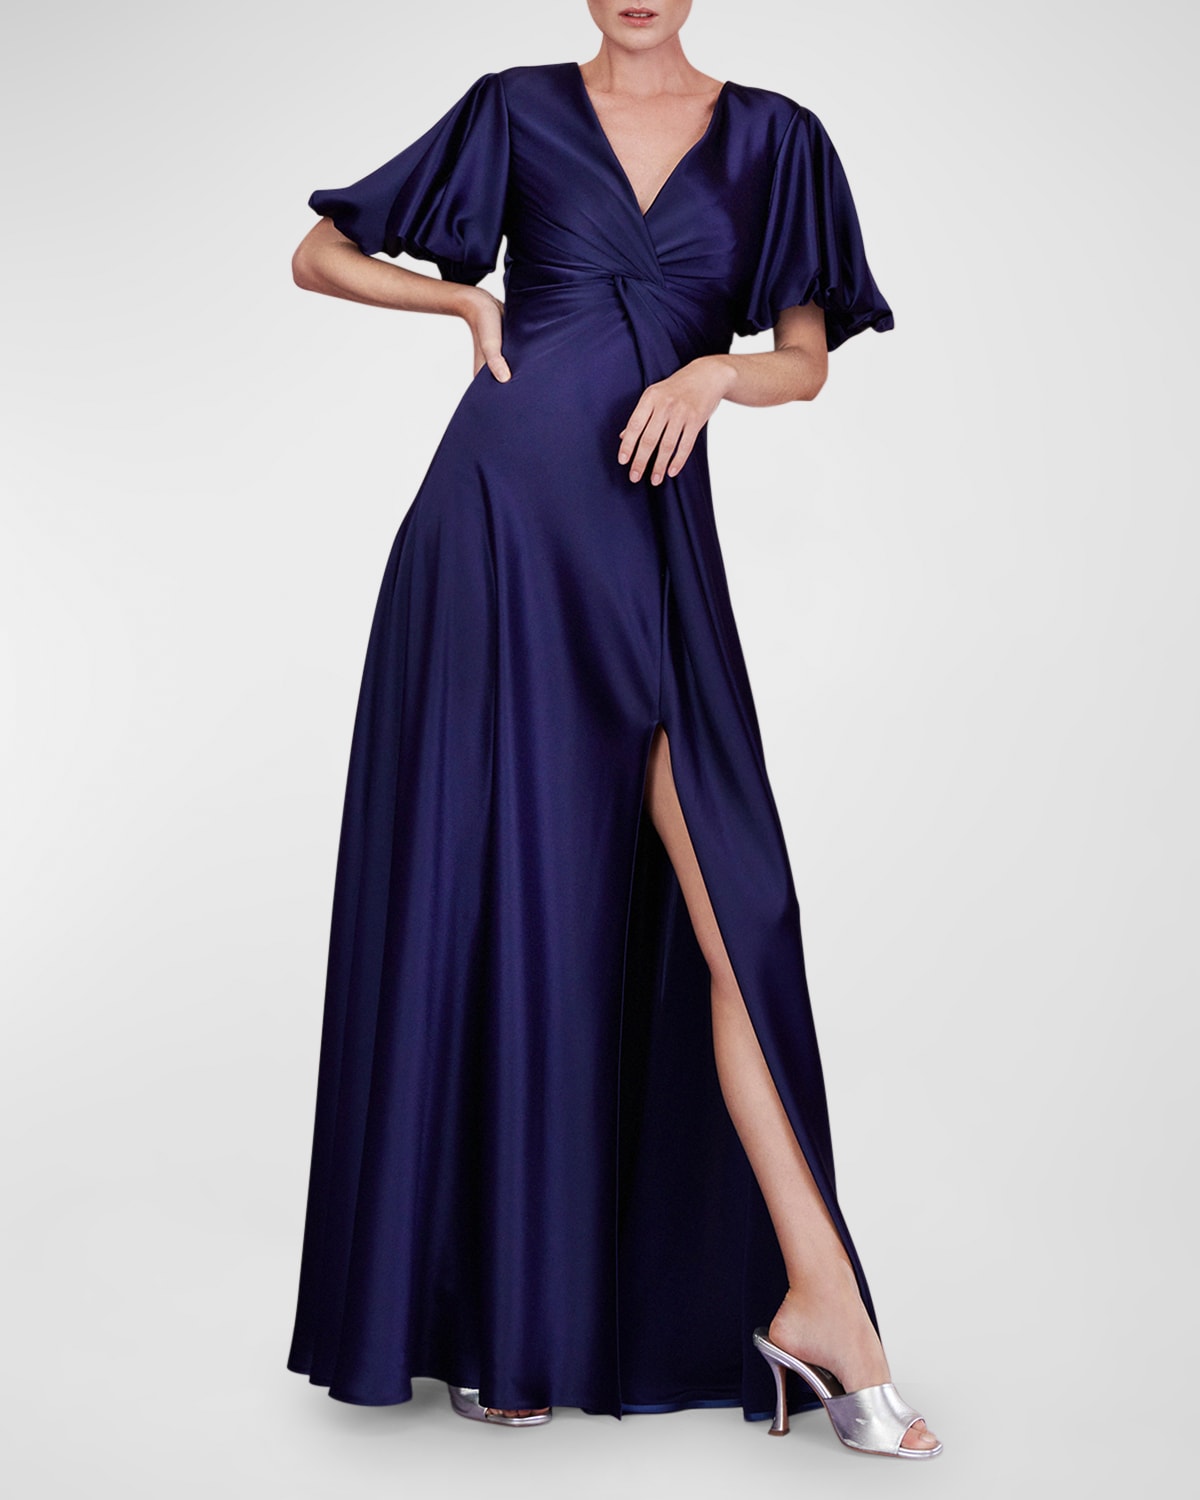 TALBOT RUNHOF WING-SLEEVE TWISTED SATIN CREPE GOWN